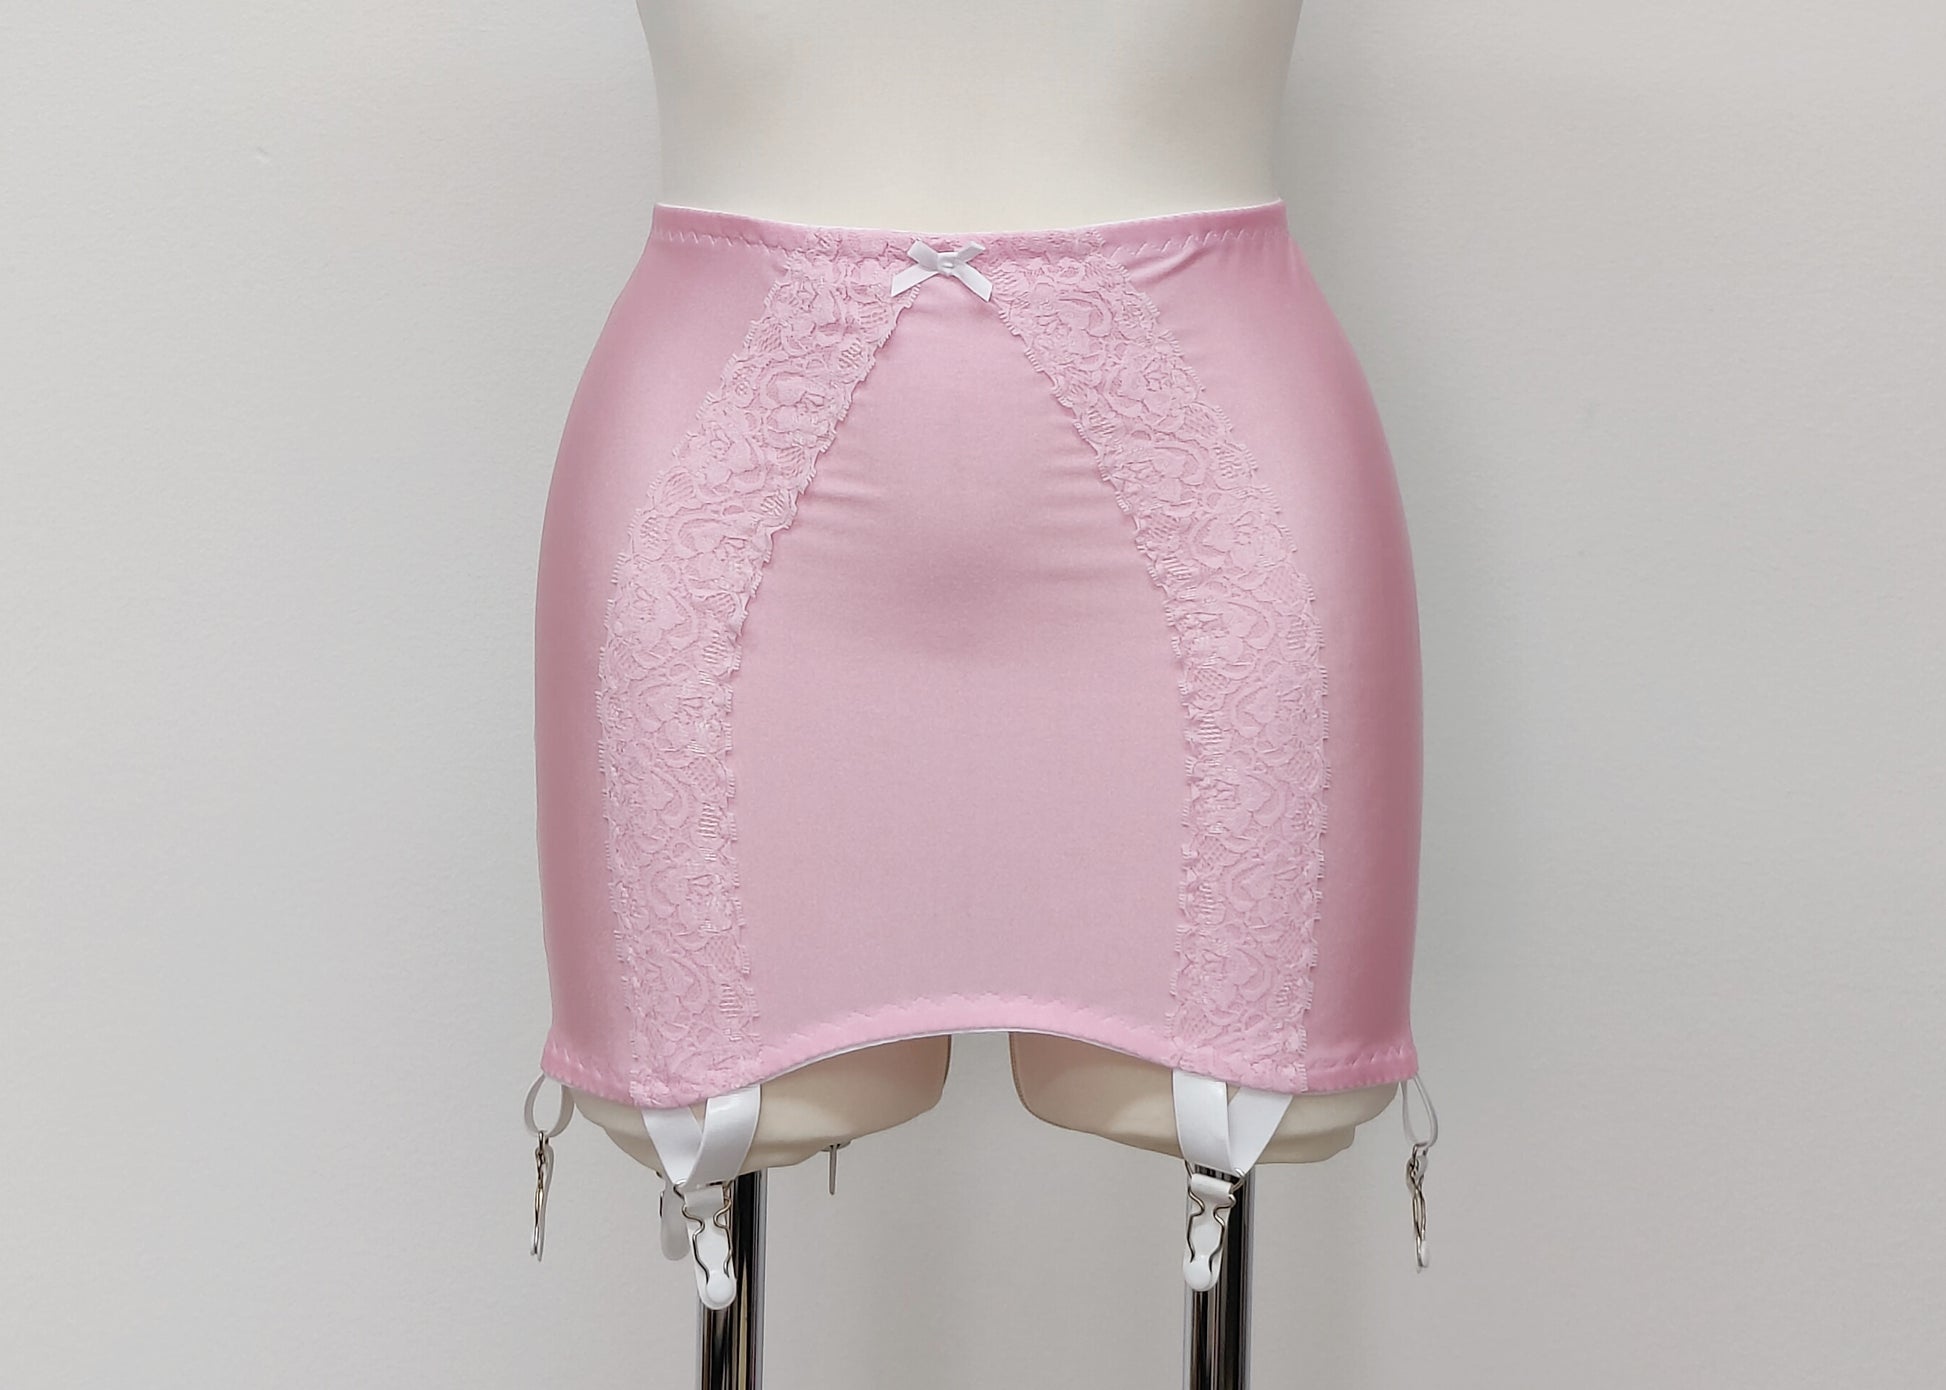 Only Monica — This is a vintage open-bottom girdle from the